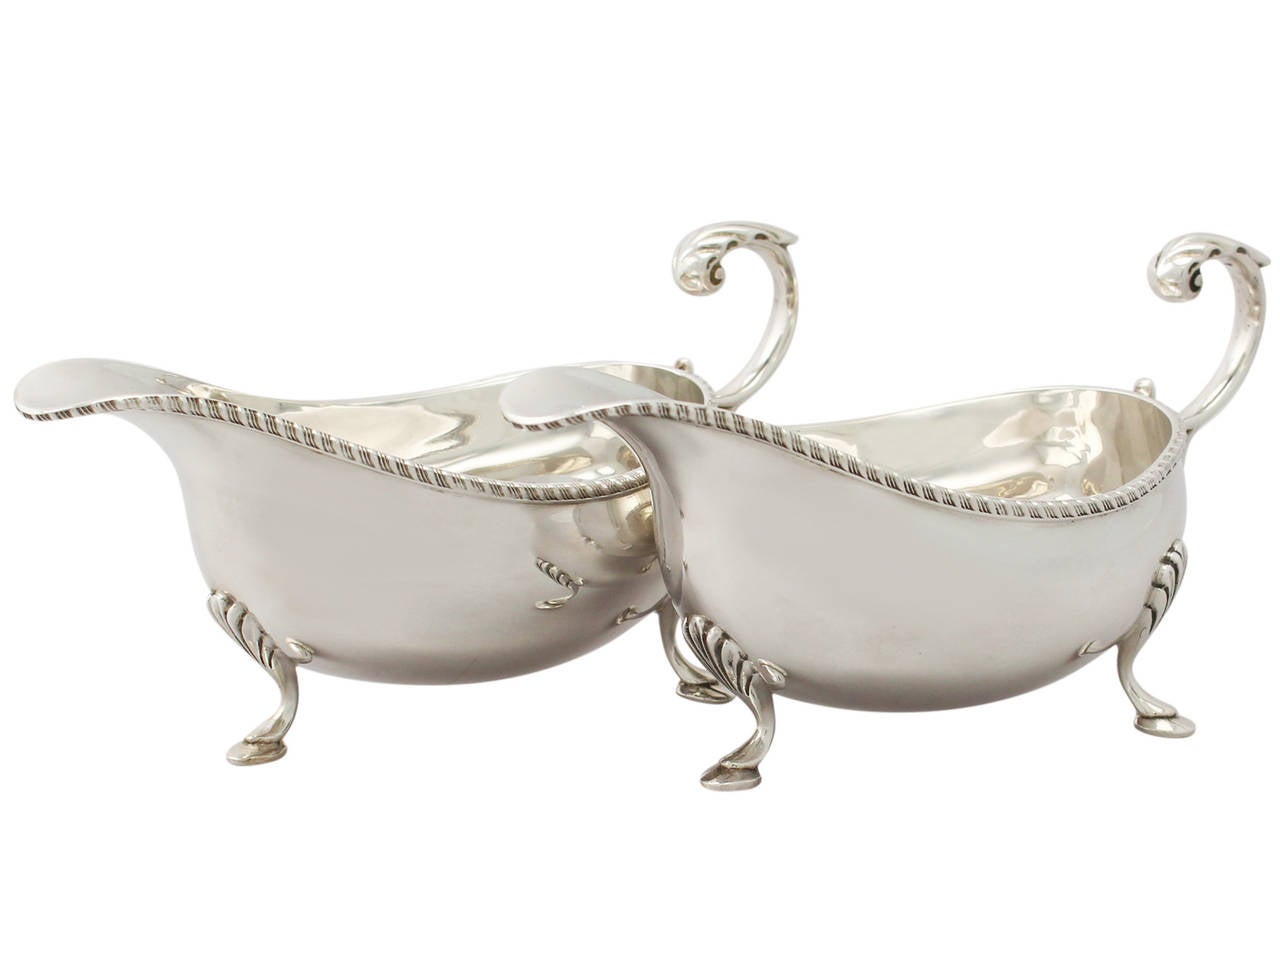 English Vintage 1960s Sterling Silver Sauceboats / Gravy Boats